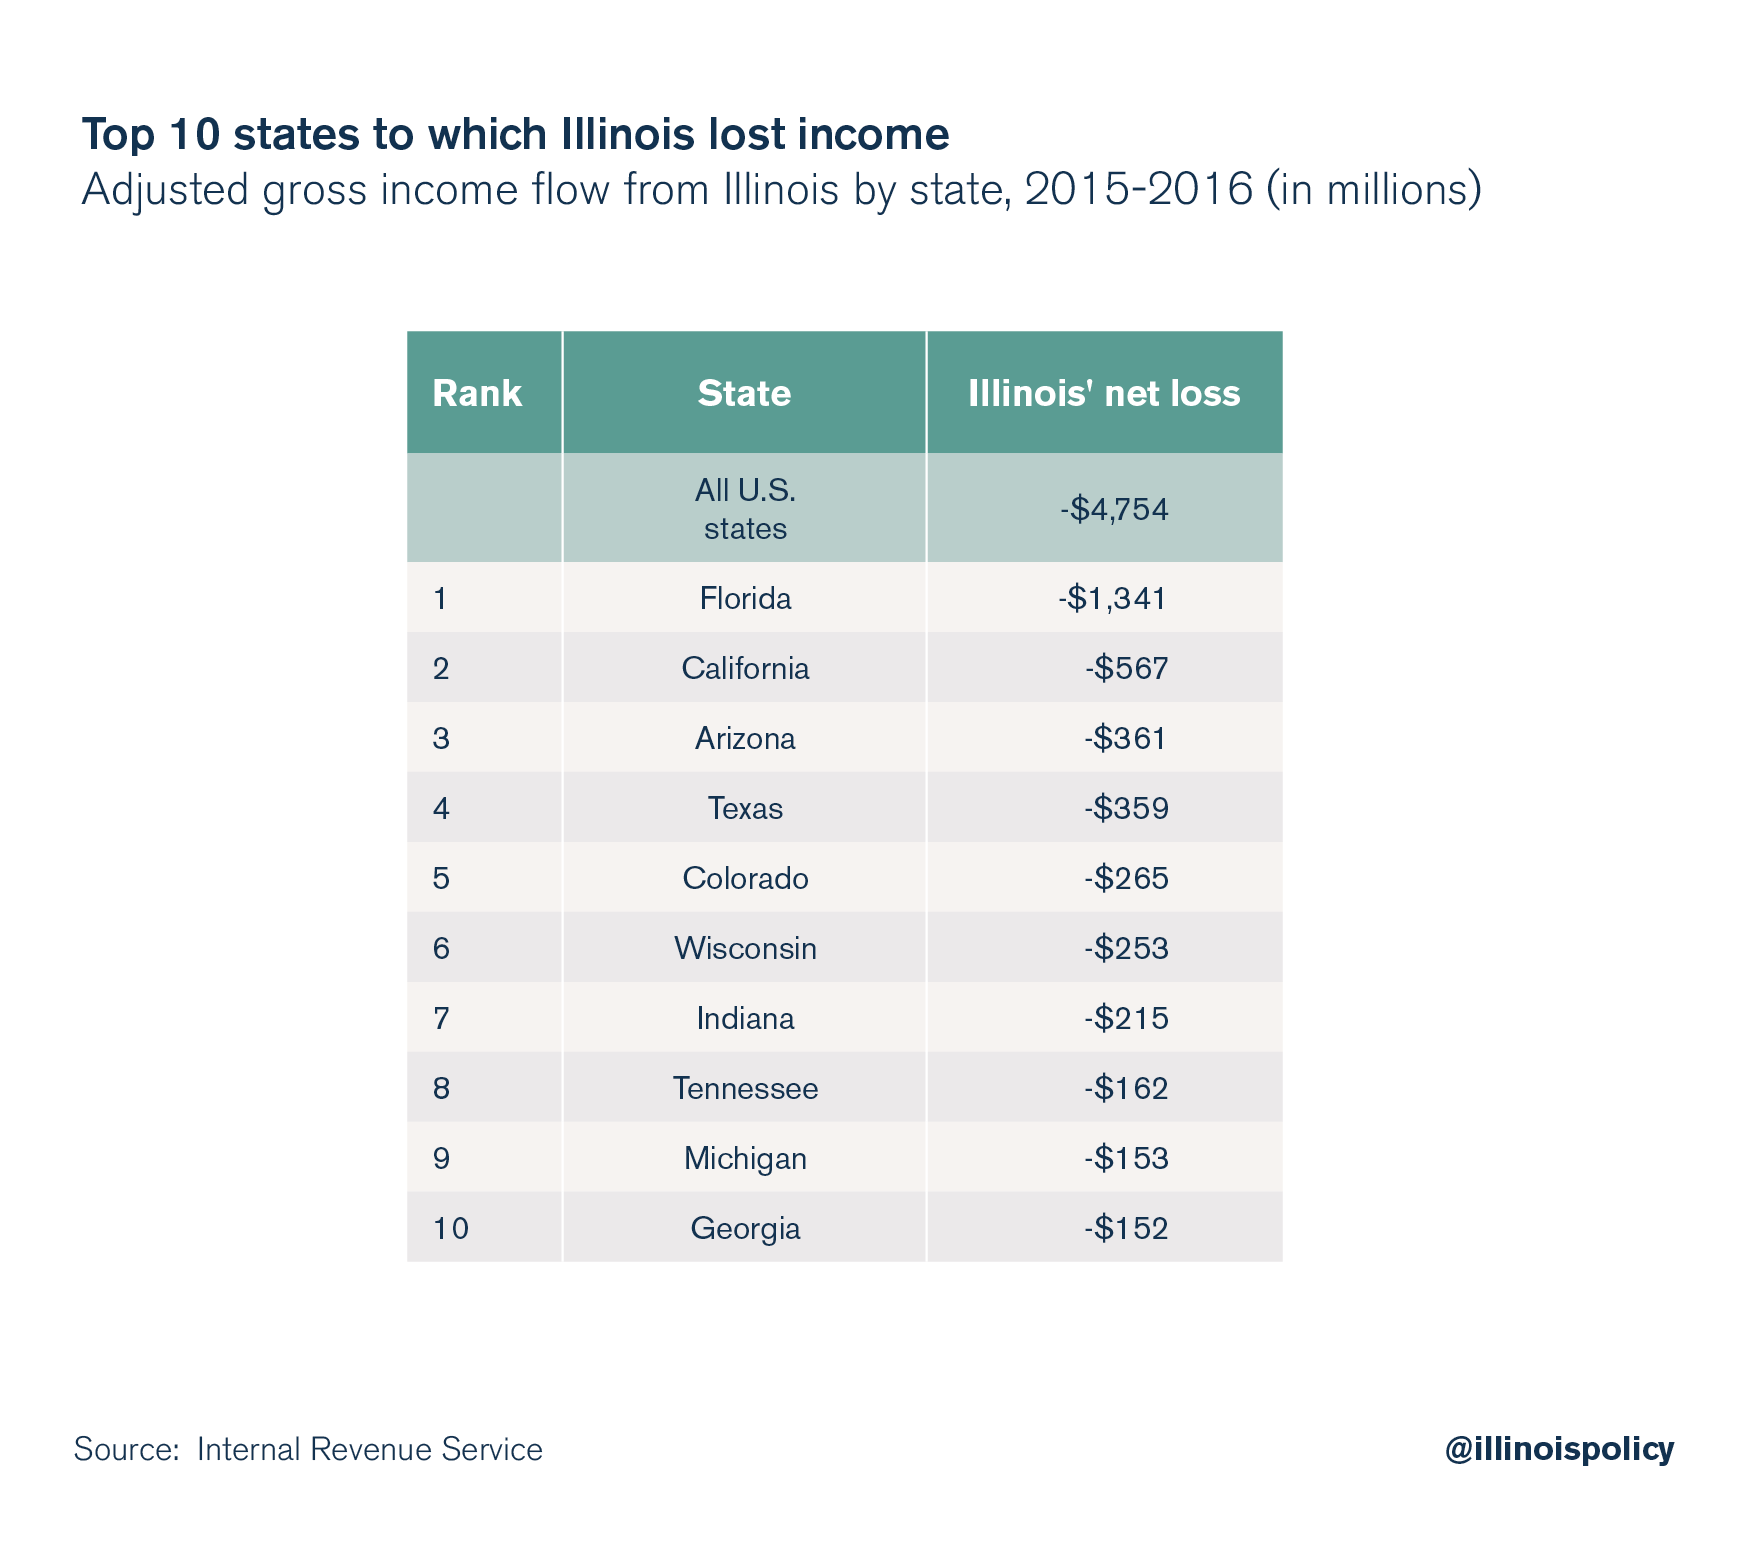 Top 10 states to which Illinois lost income